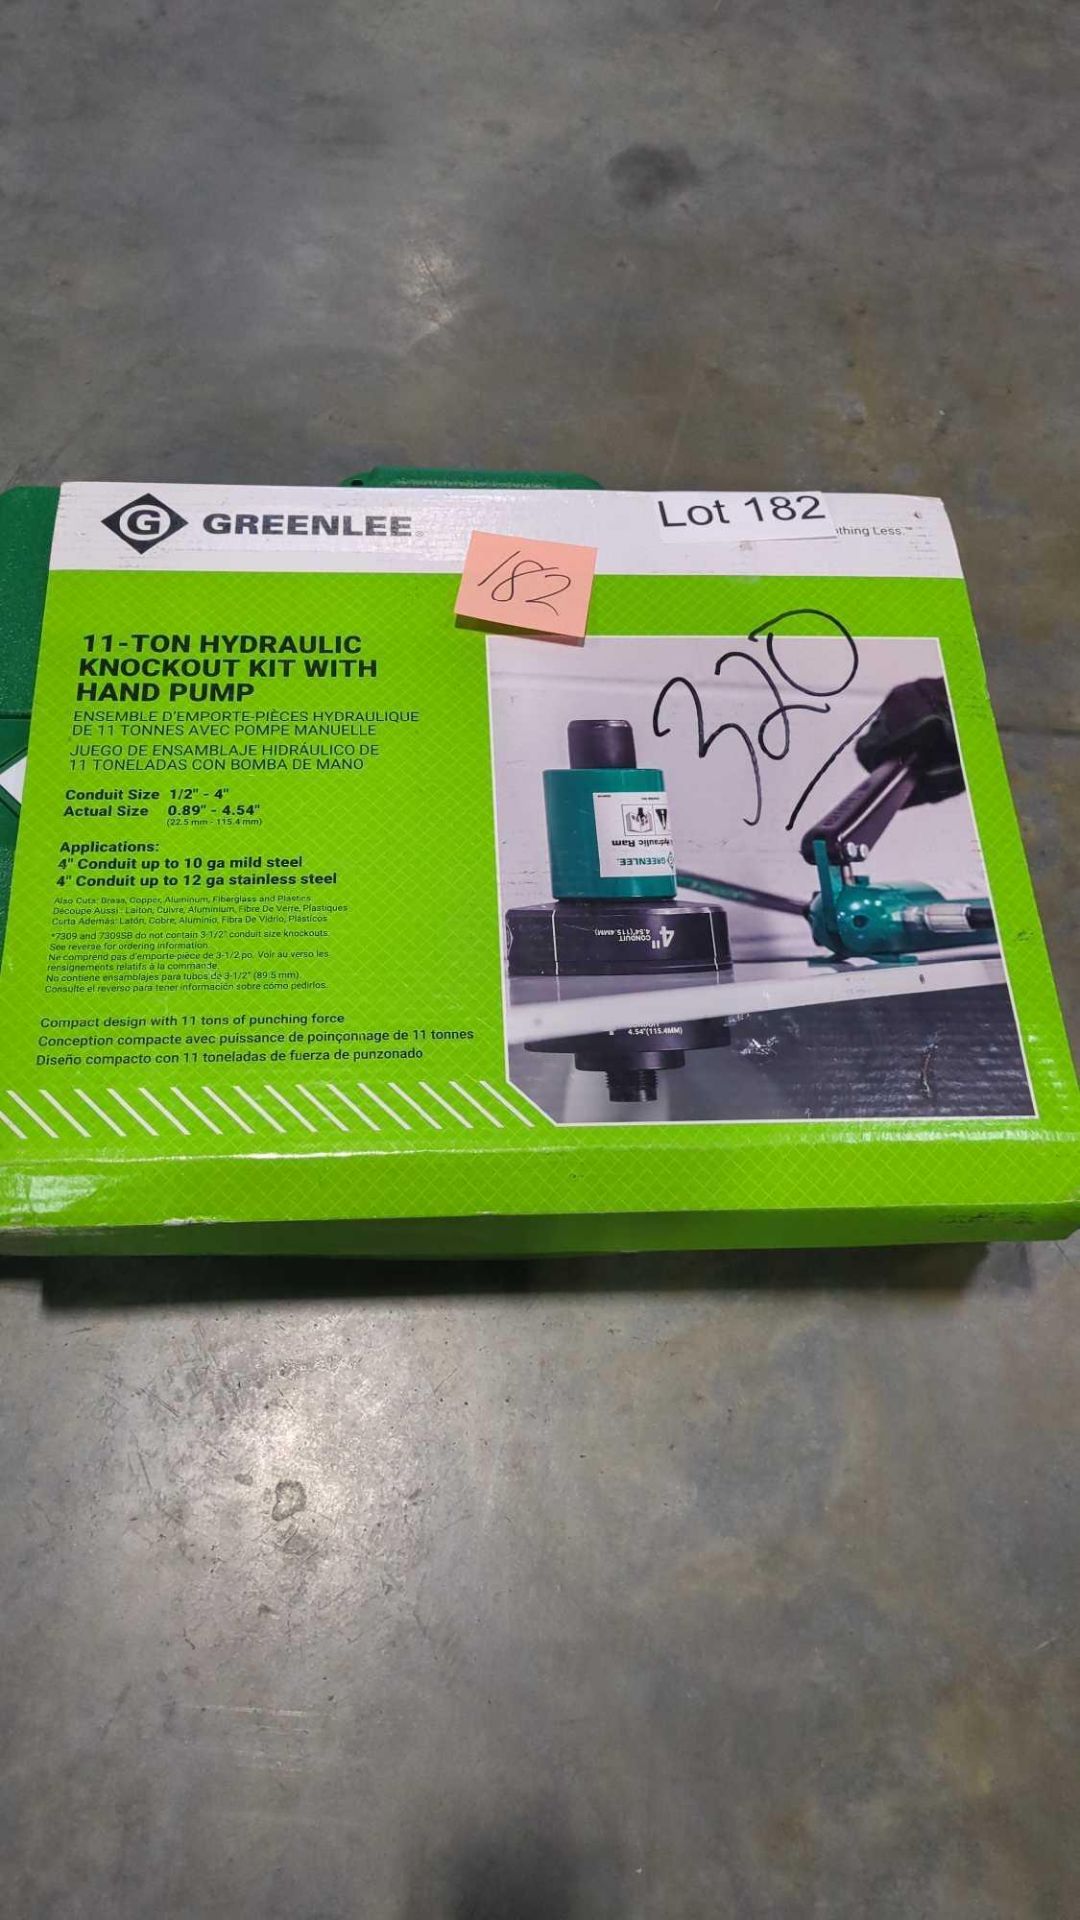 Greenlee 11-Ton Hydraulic Knockout Kit with Hand Pump - Image 2 of 2